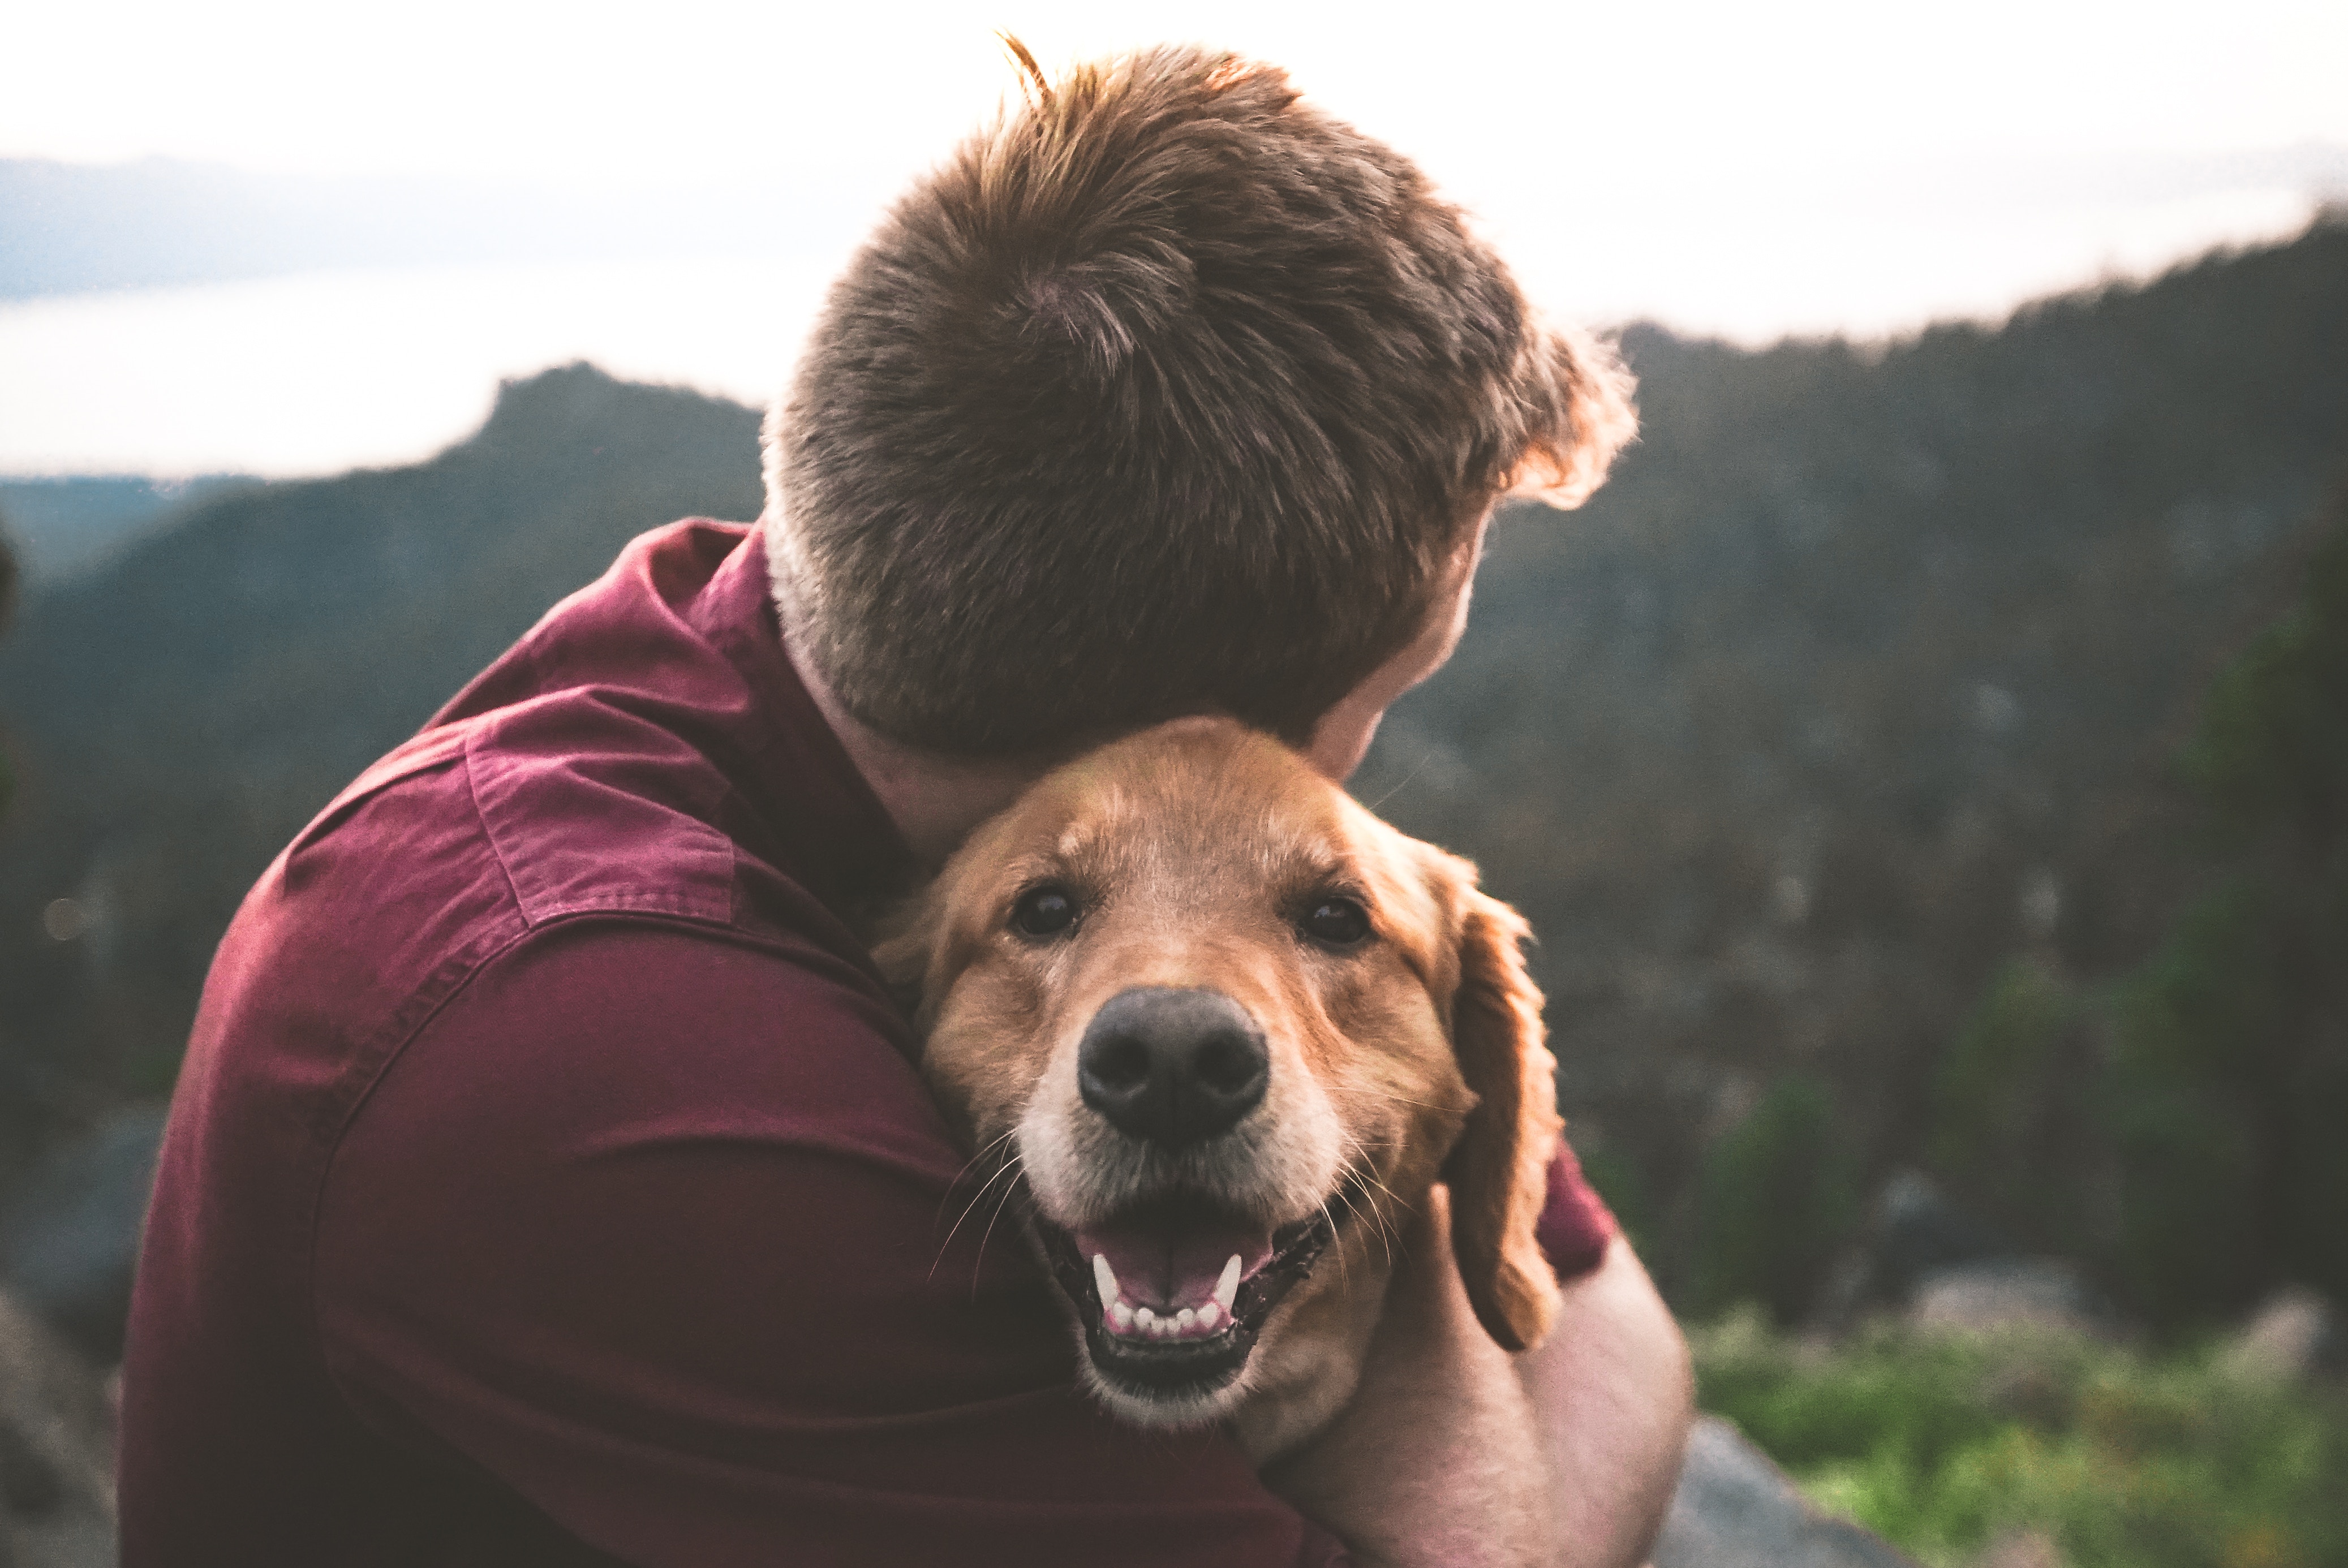 As veterinary medicine continues to advance, companion animals are living longer than ever—and pet insurance is a great way to ensure you can provide the care yours will need along the way.